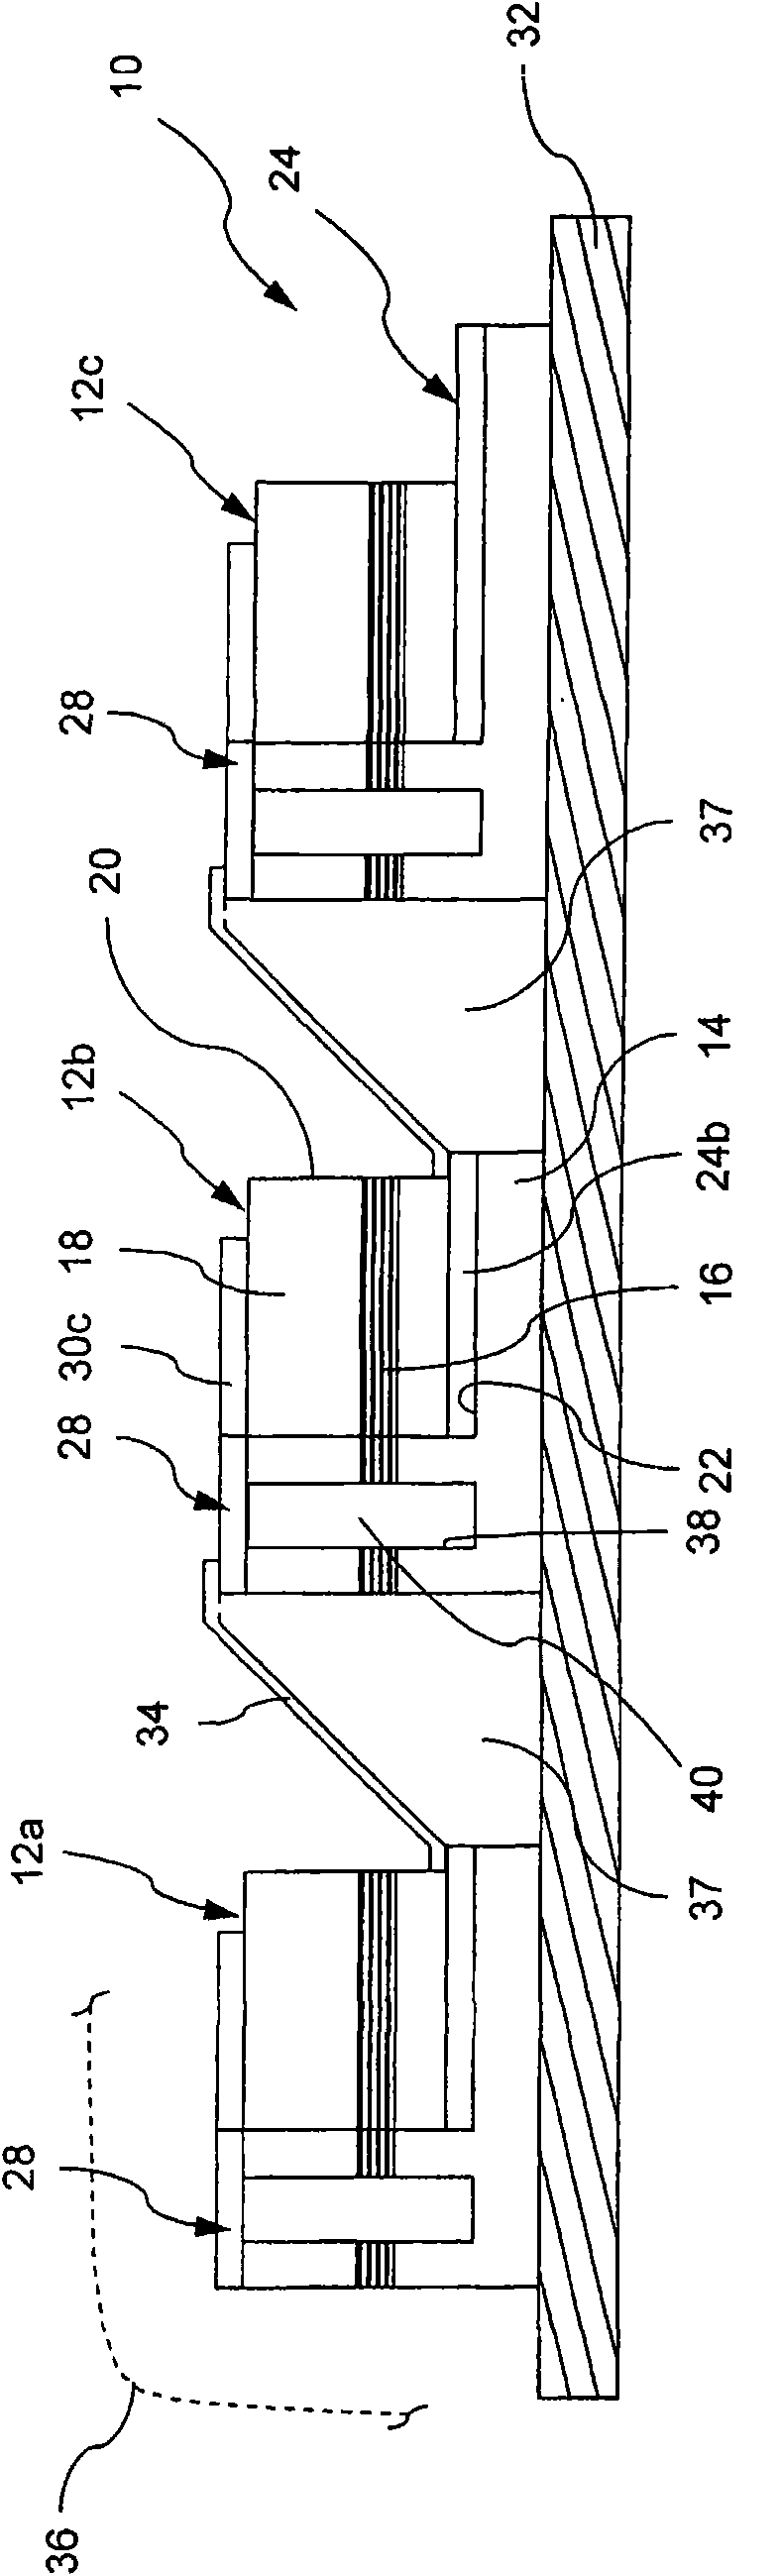 Electrical connection for semiconductor structures, method for the production thereof, and use of such a connection in a luminous element